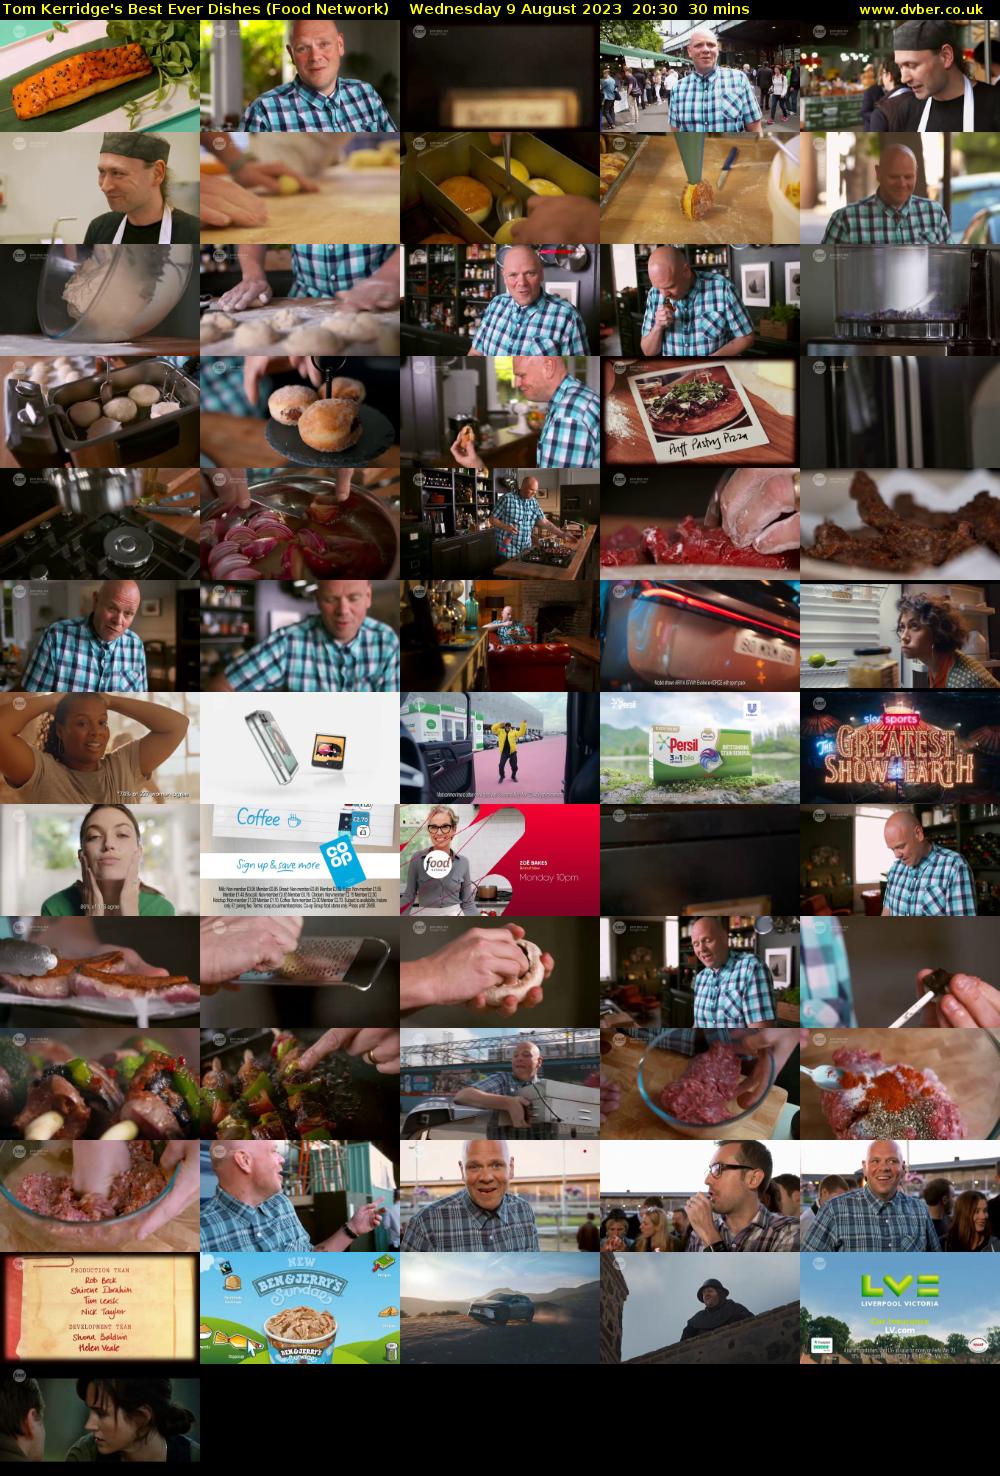 Tom Kerridge's Best Ever Dishes (Food Network) Wednesday 9 August 2023 20:30 - 21:00